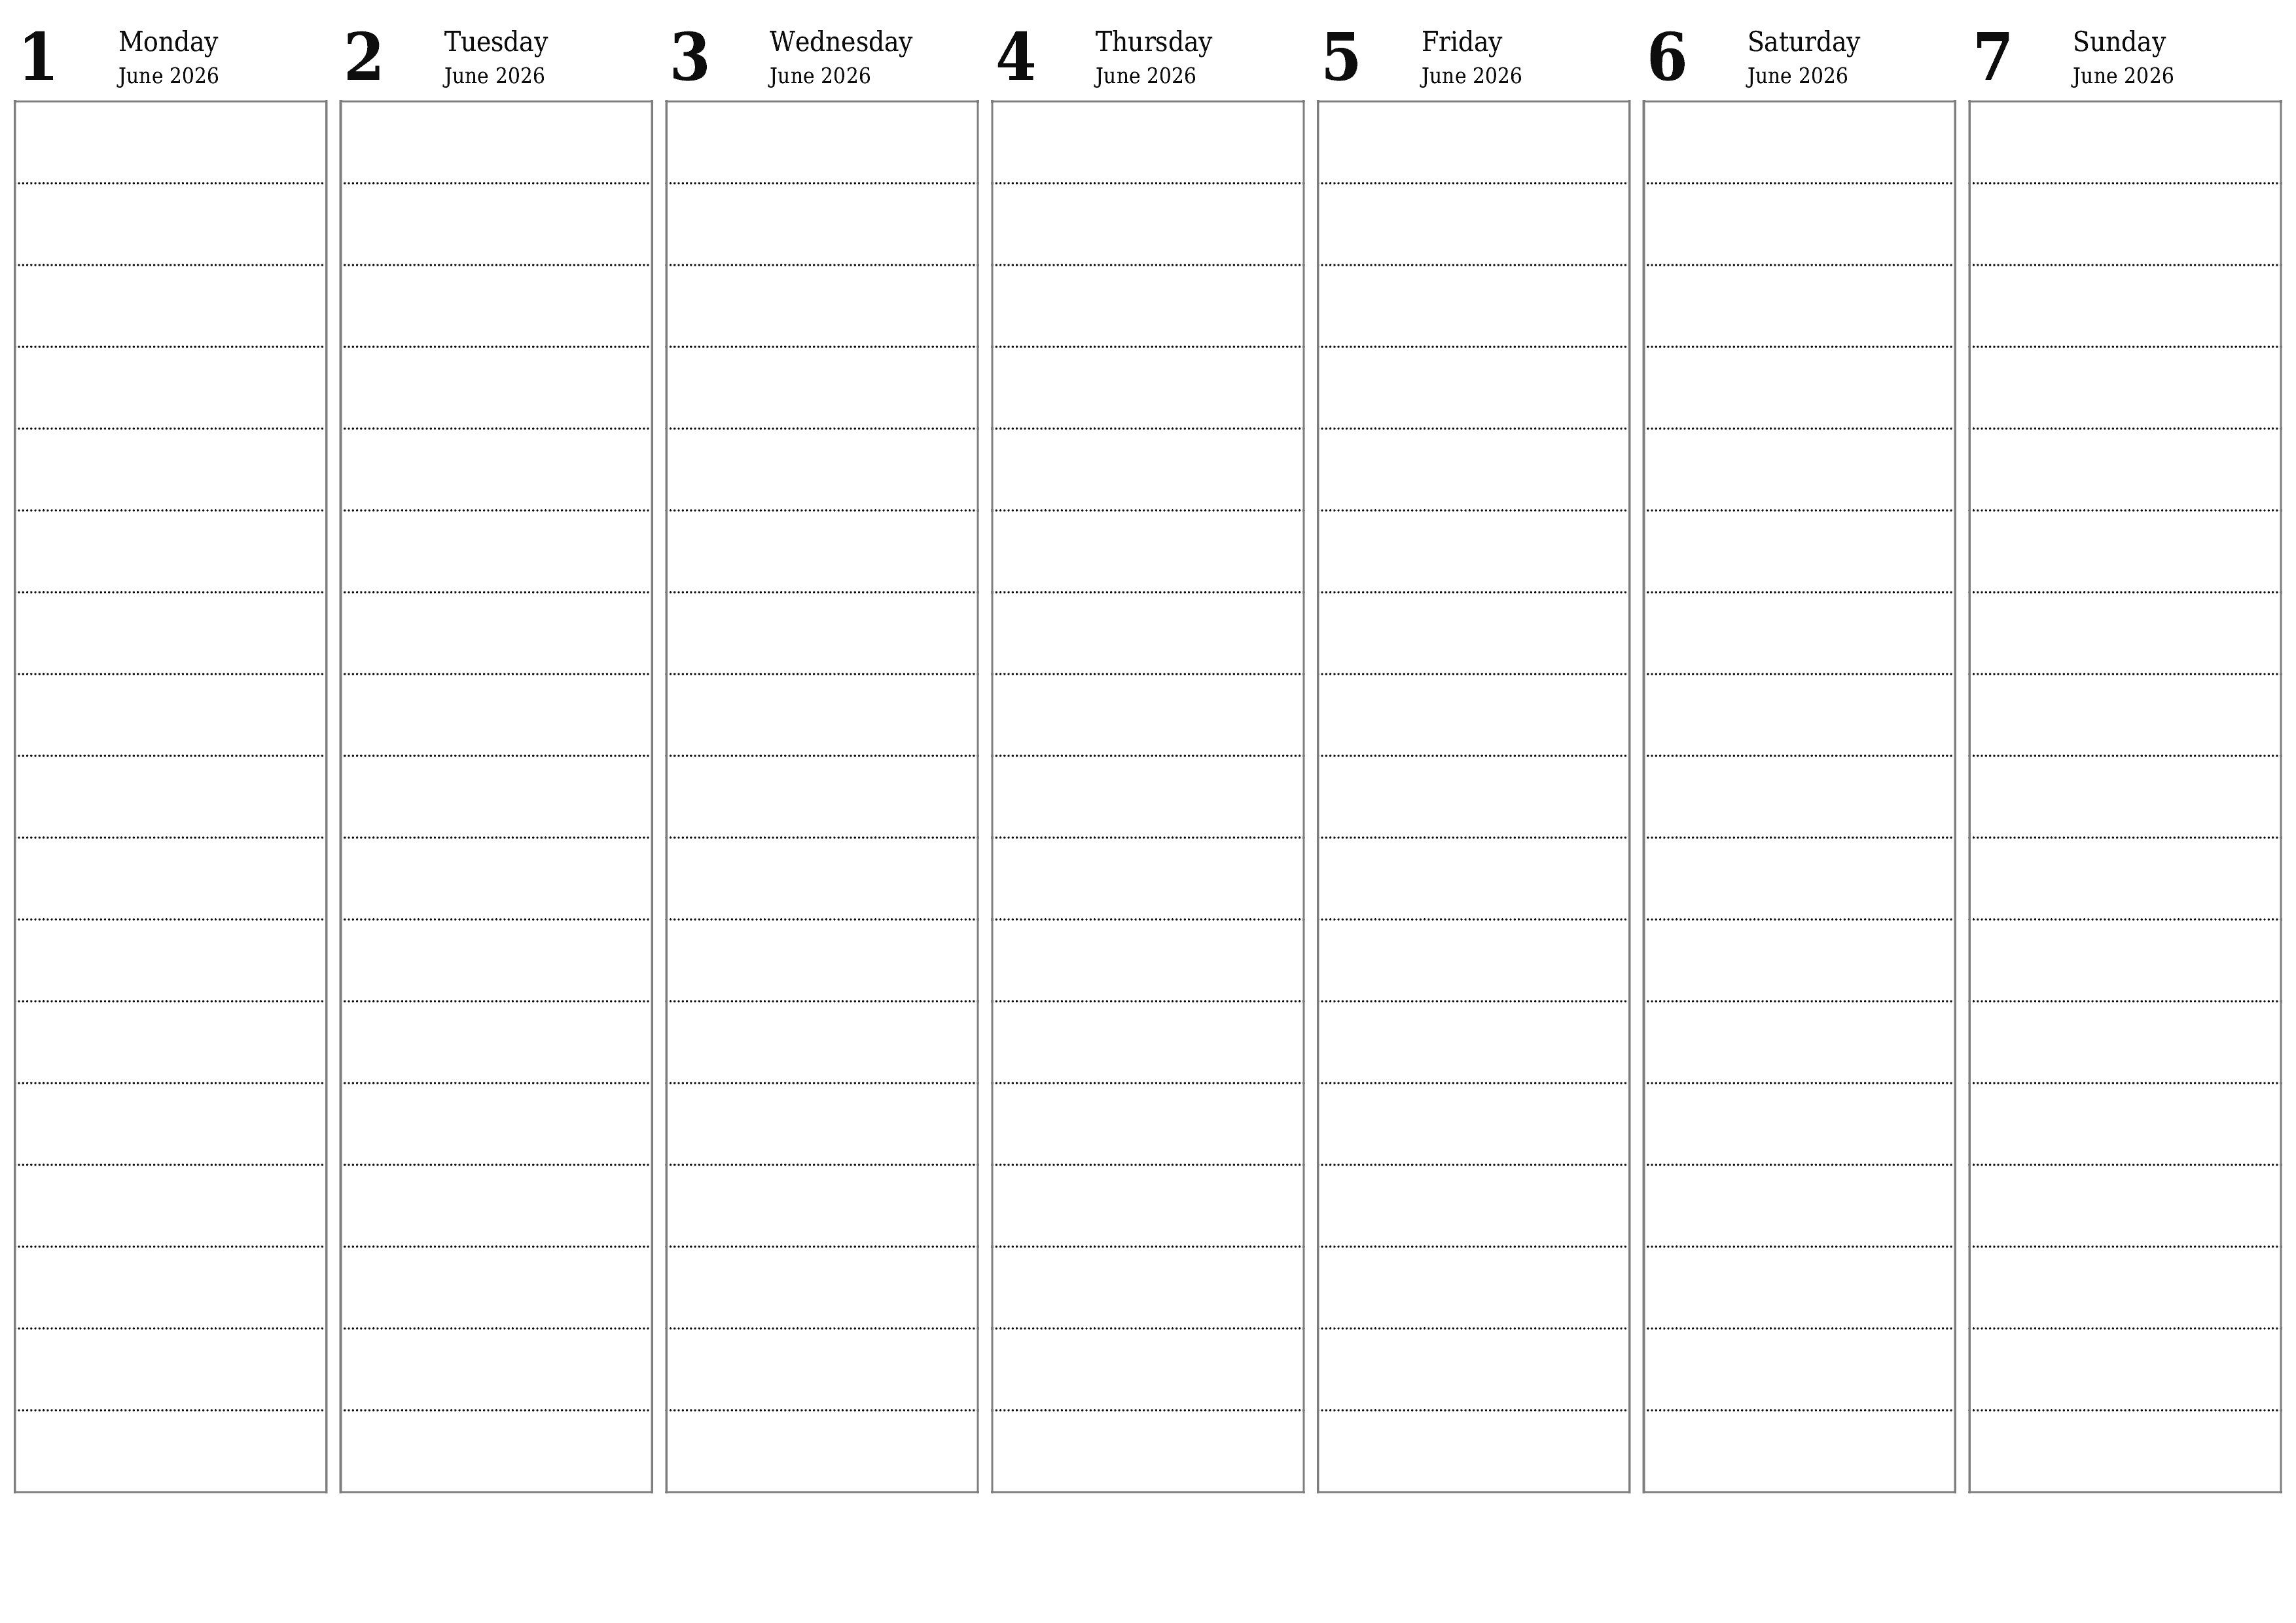 Blank weekly printable calendar and planner for week June 2026 with notes, save and print to PDF PNG English